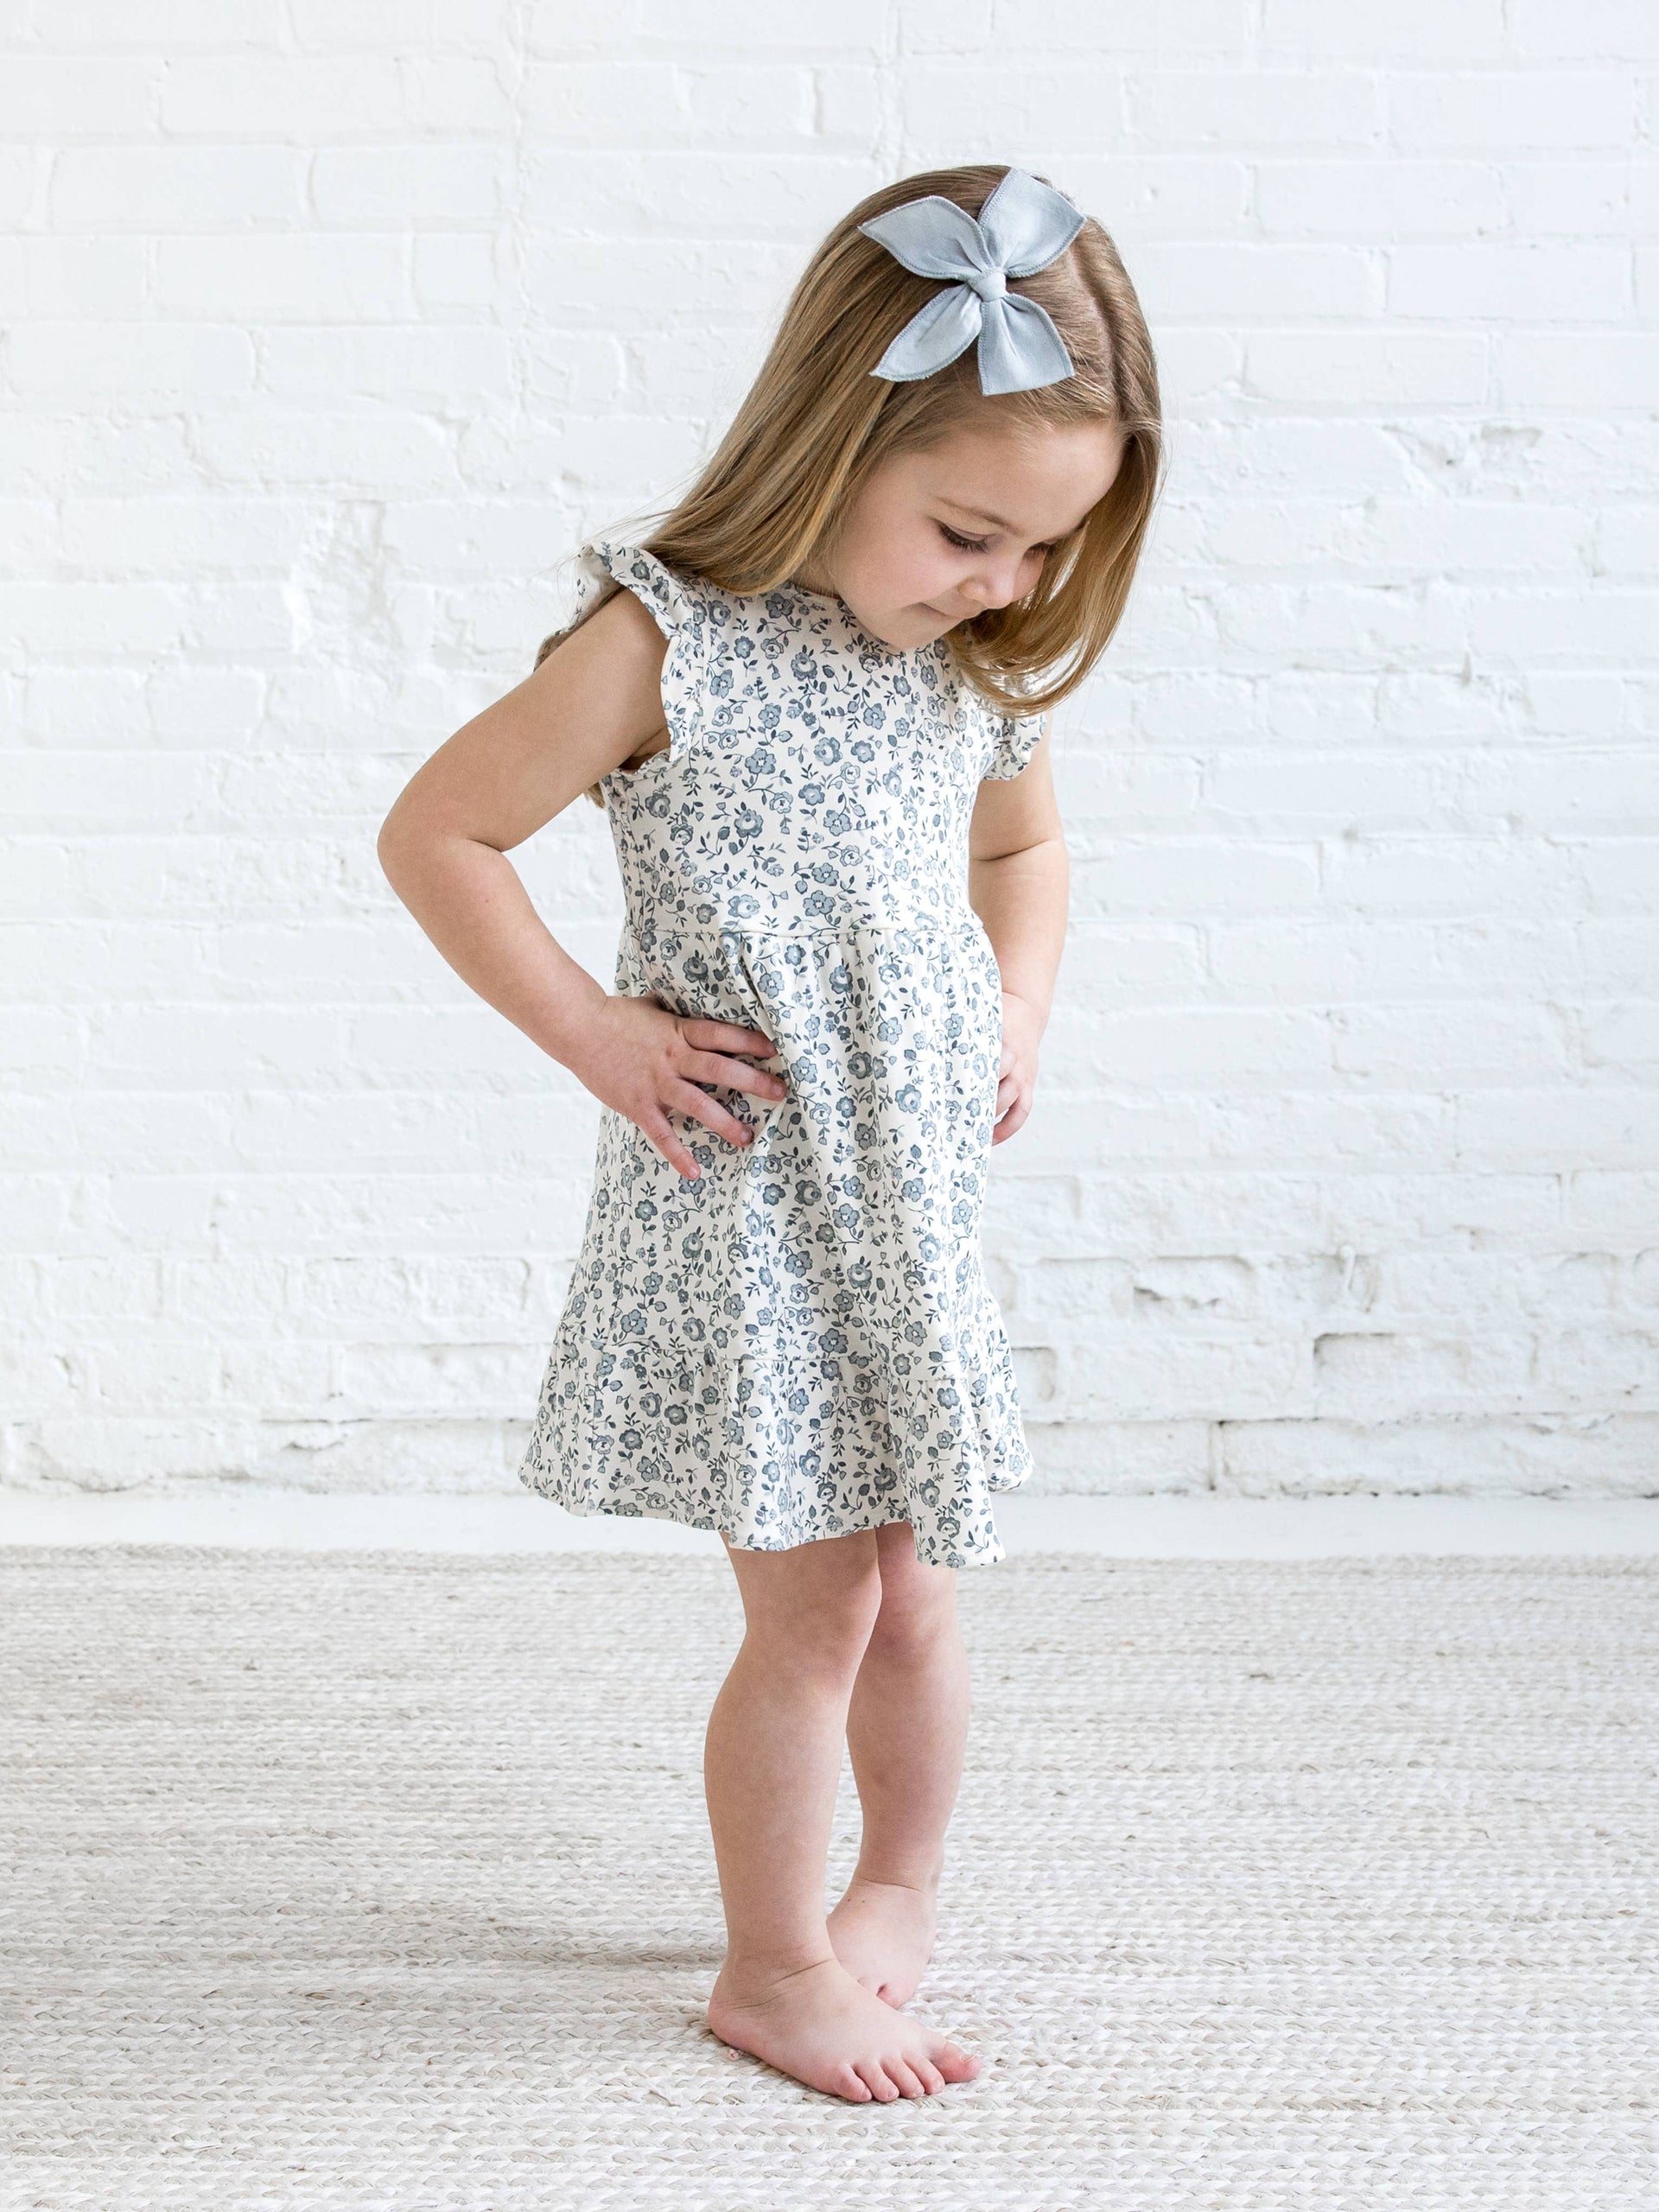 Colored Organics - Organic Baby & Kids Tilly Tiered Dress - Lena Floral: 6-12M